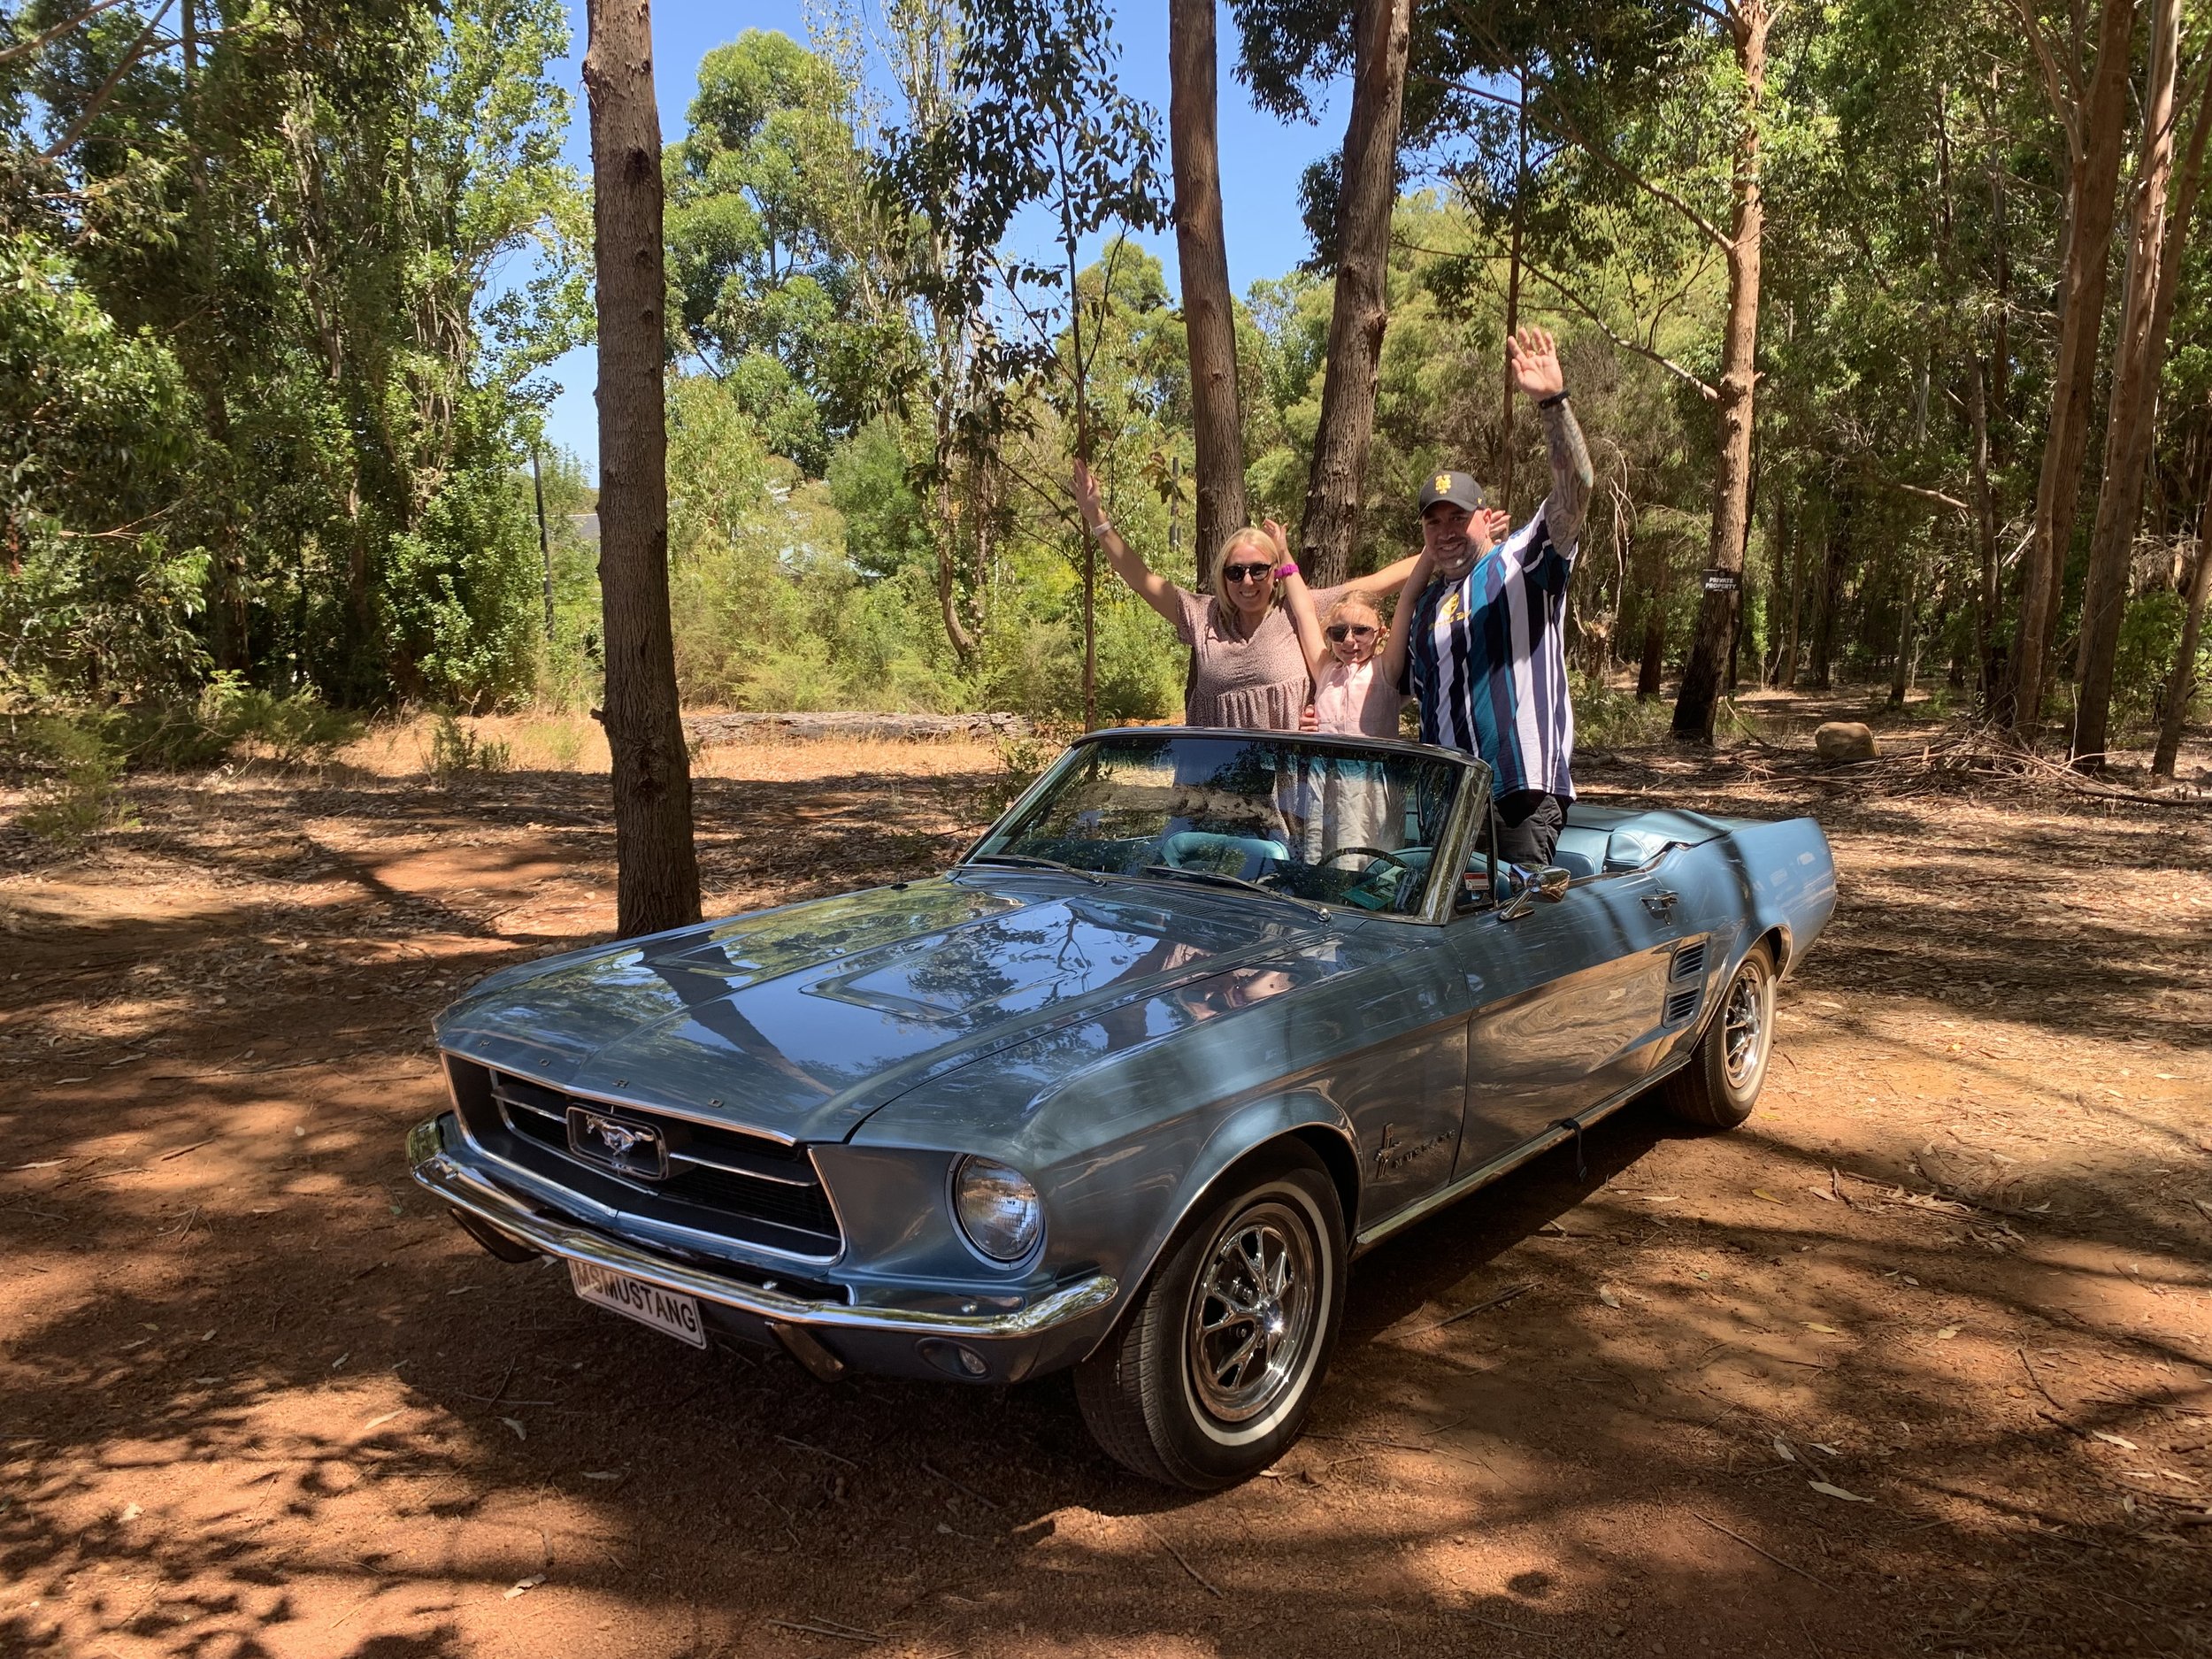 birthday-event-mustang hire-classic car-wine tour-margaret river2.JPG